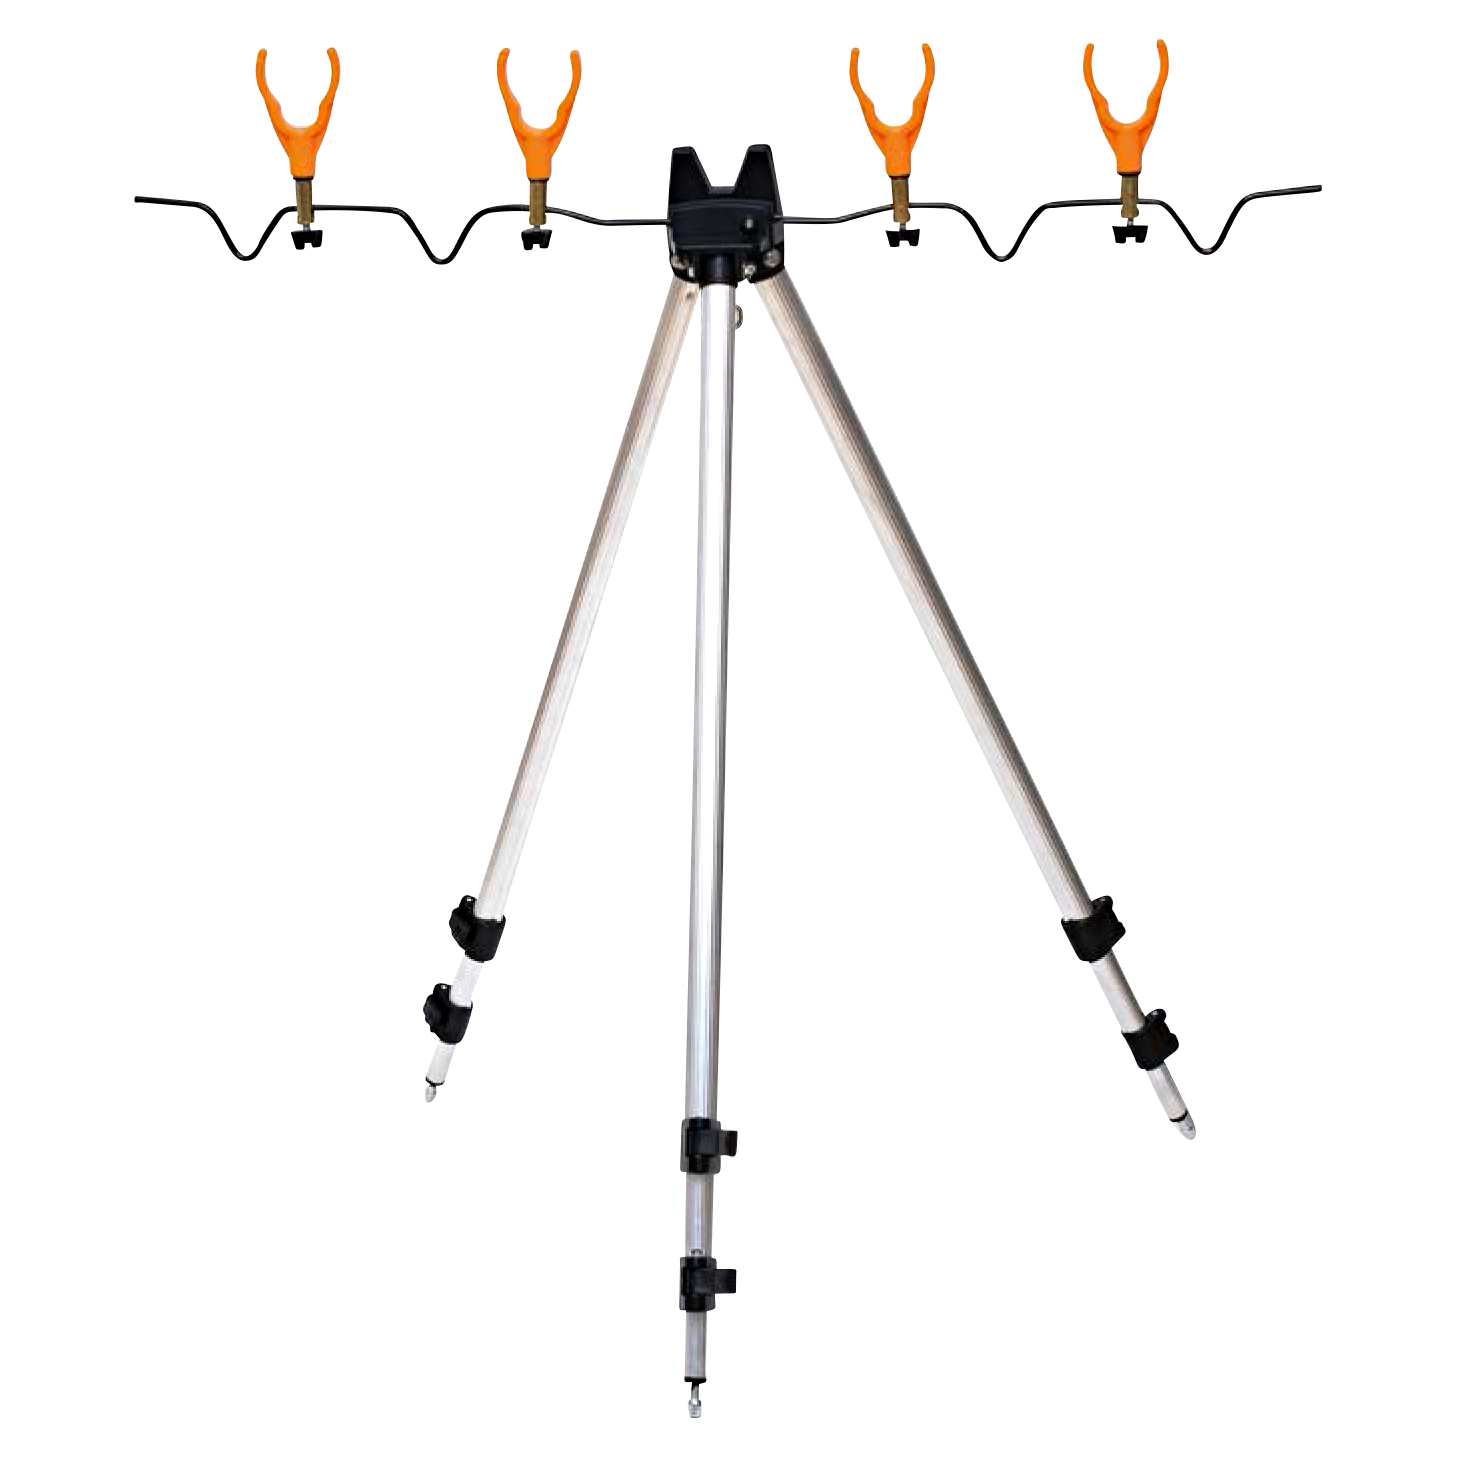 Behr Tripod rod holder at low prices